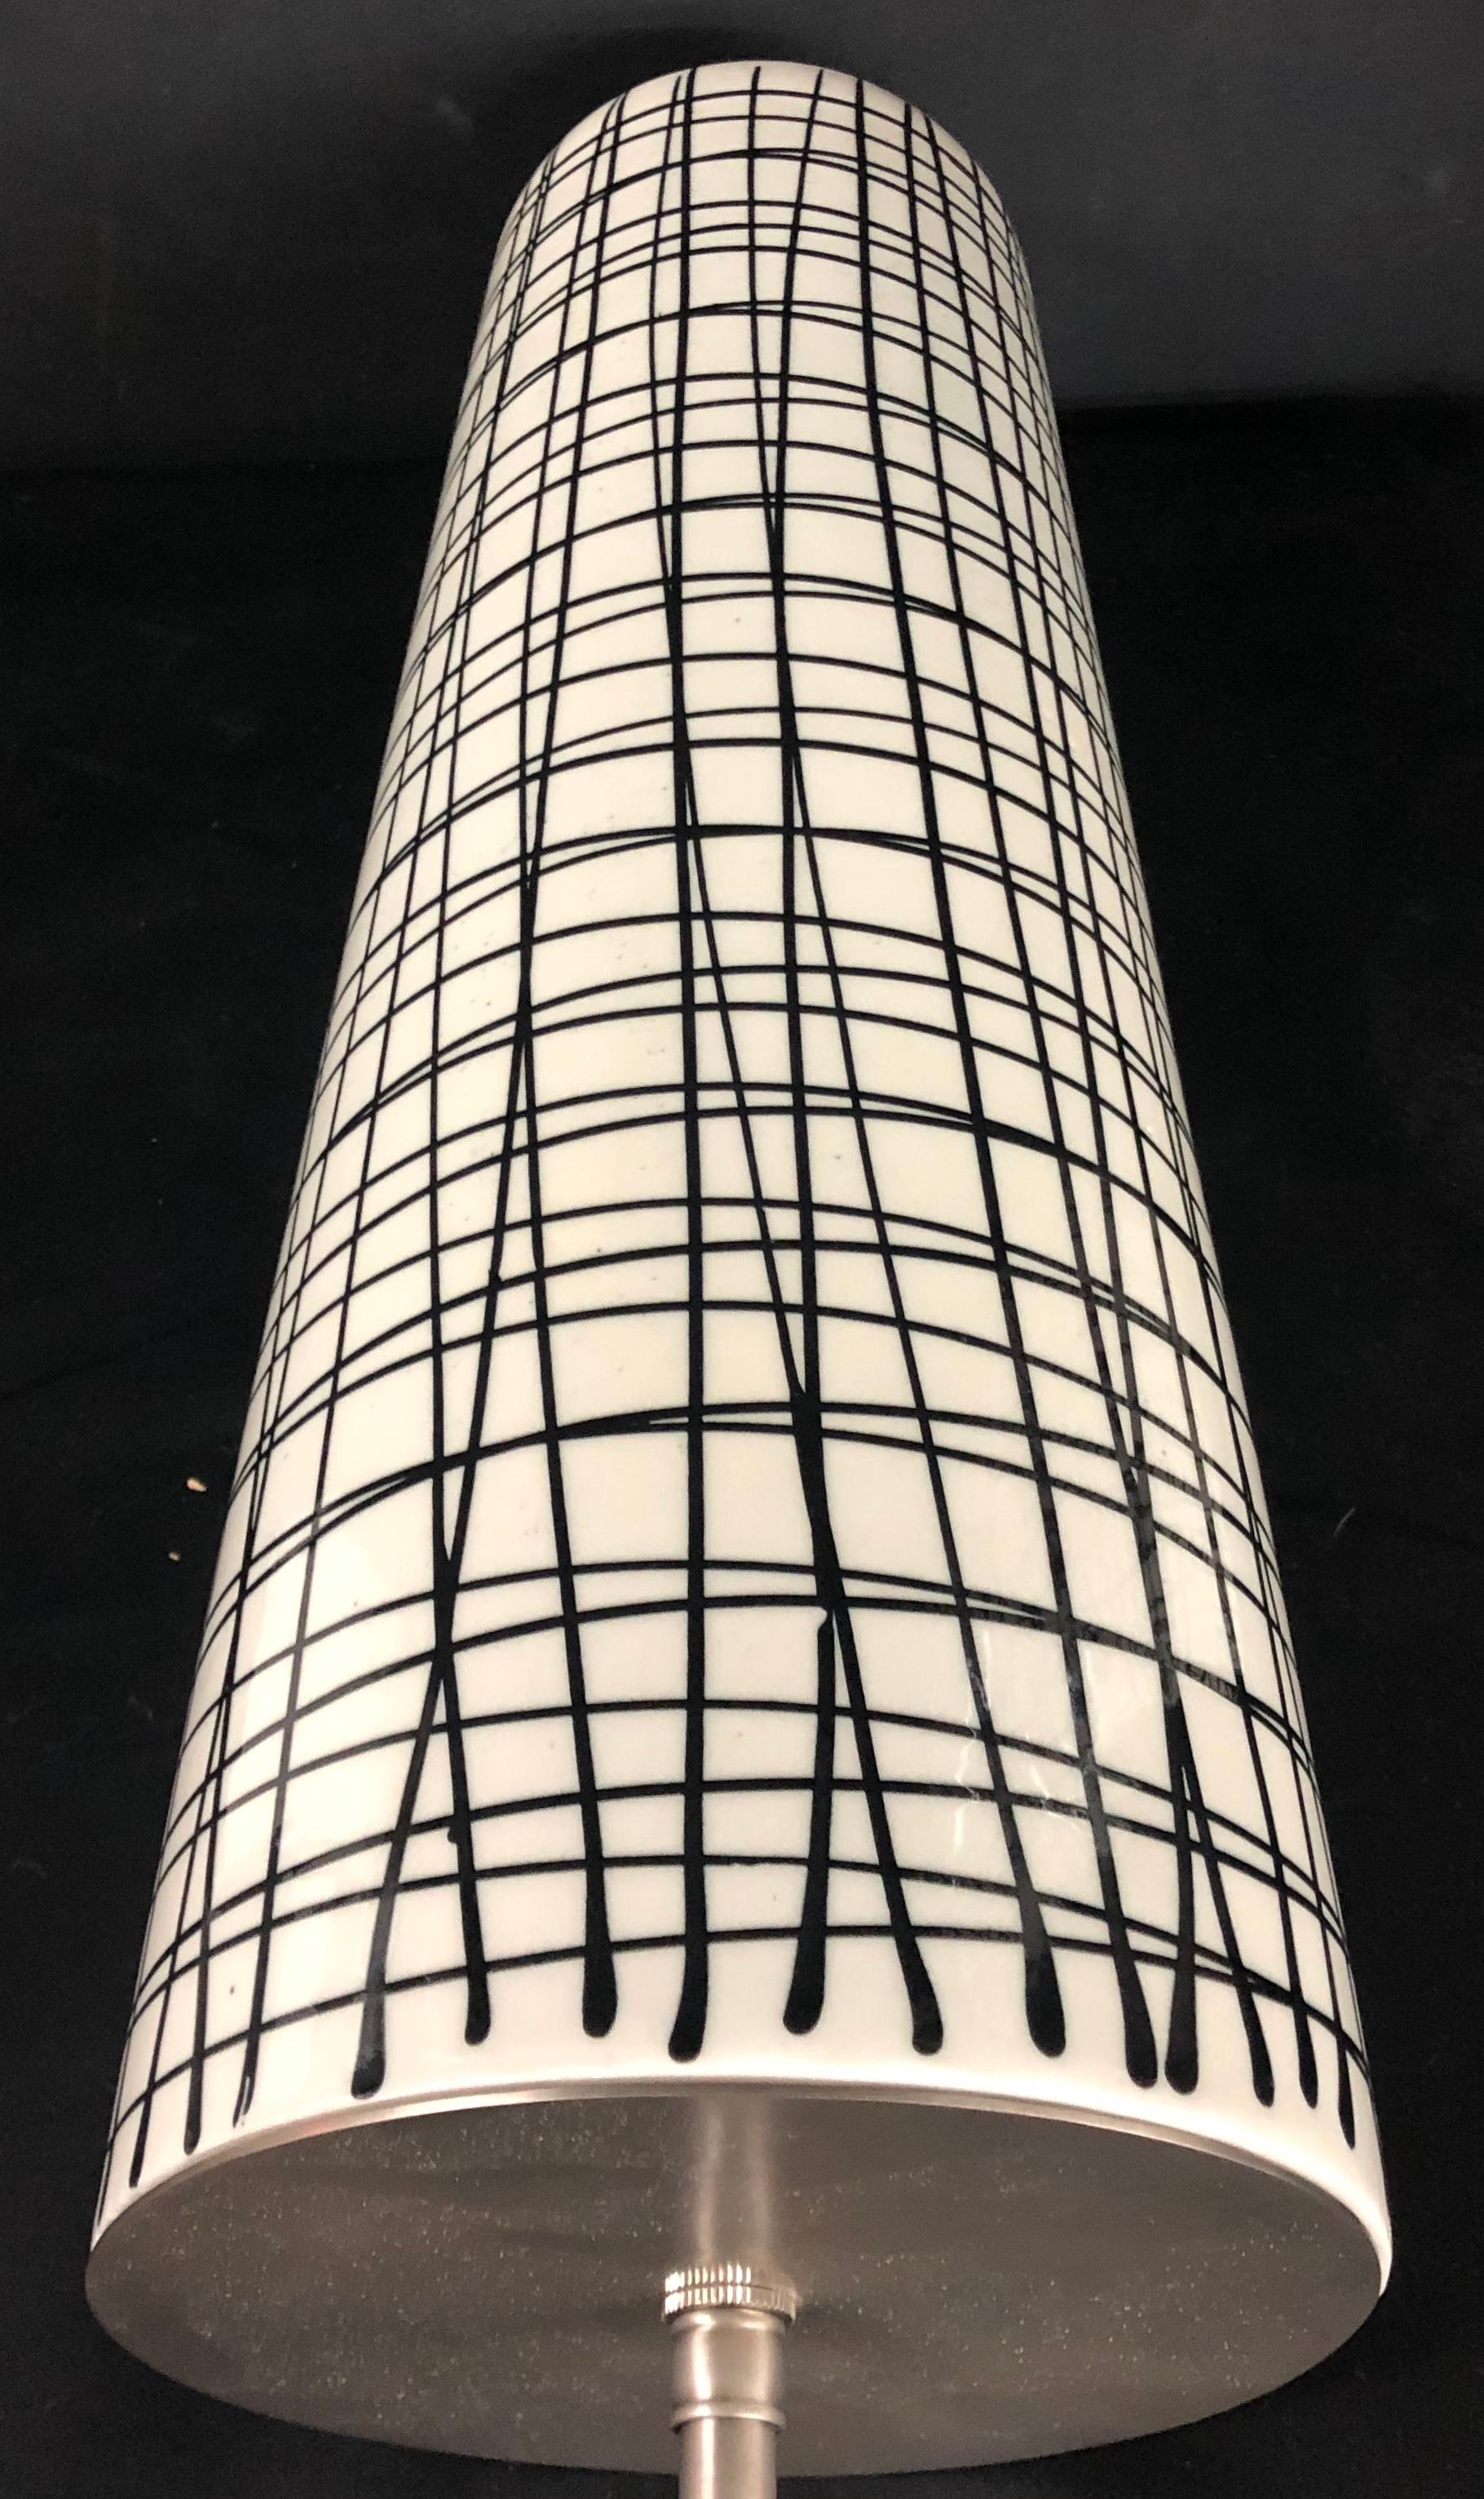 Ceramic Pair of Tall Black and White Crosshatched Vases with Lamp Application